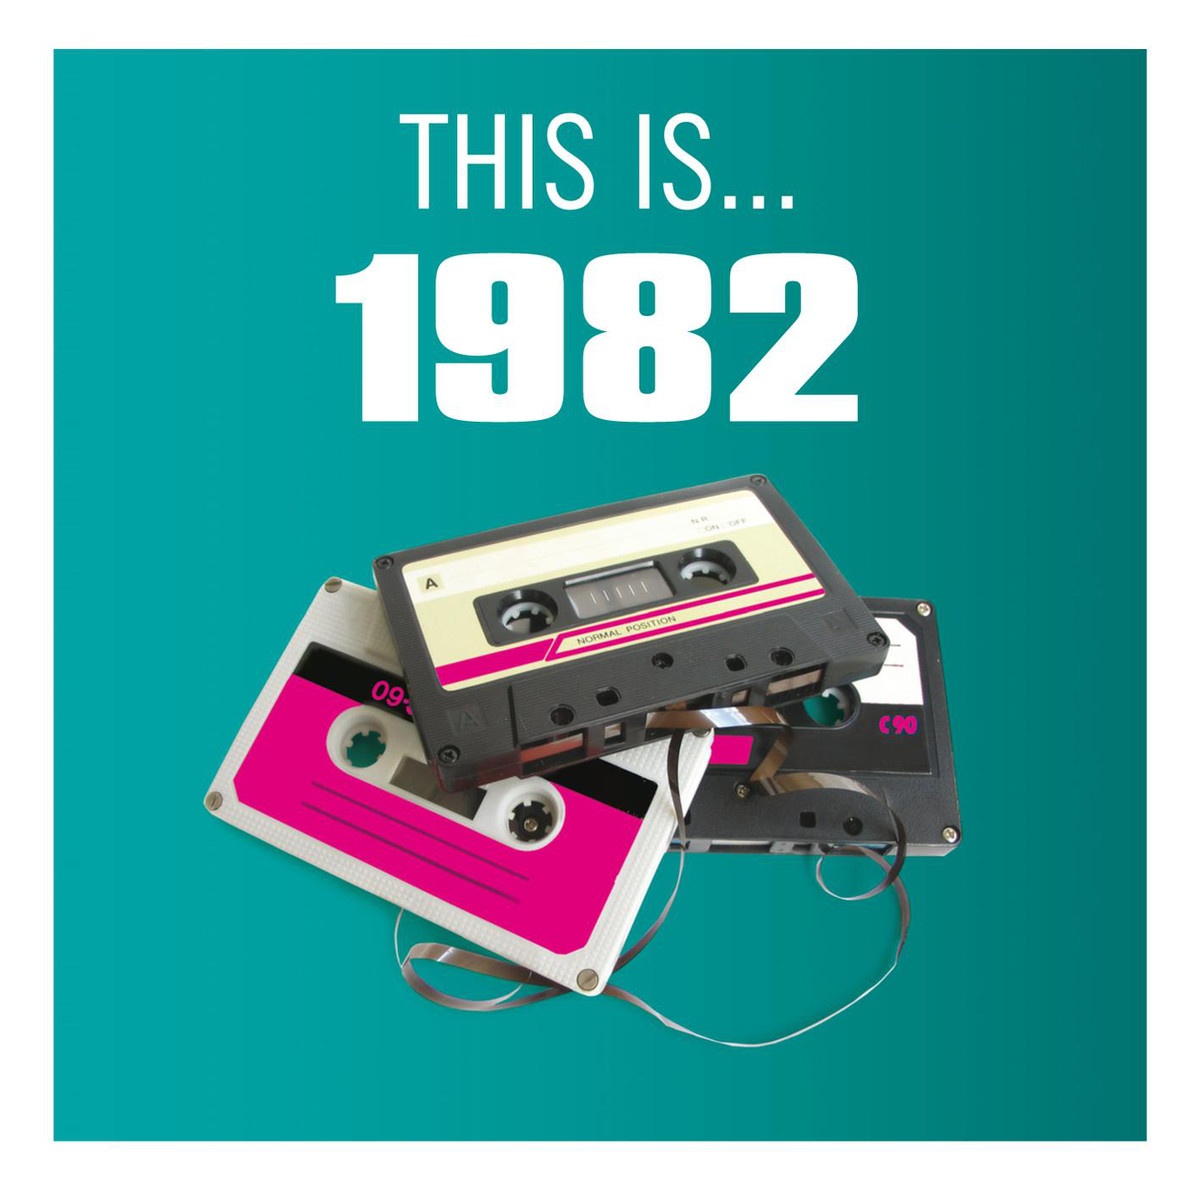 This Is... 1982